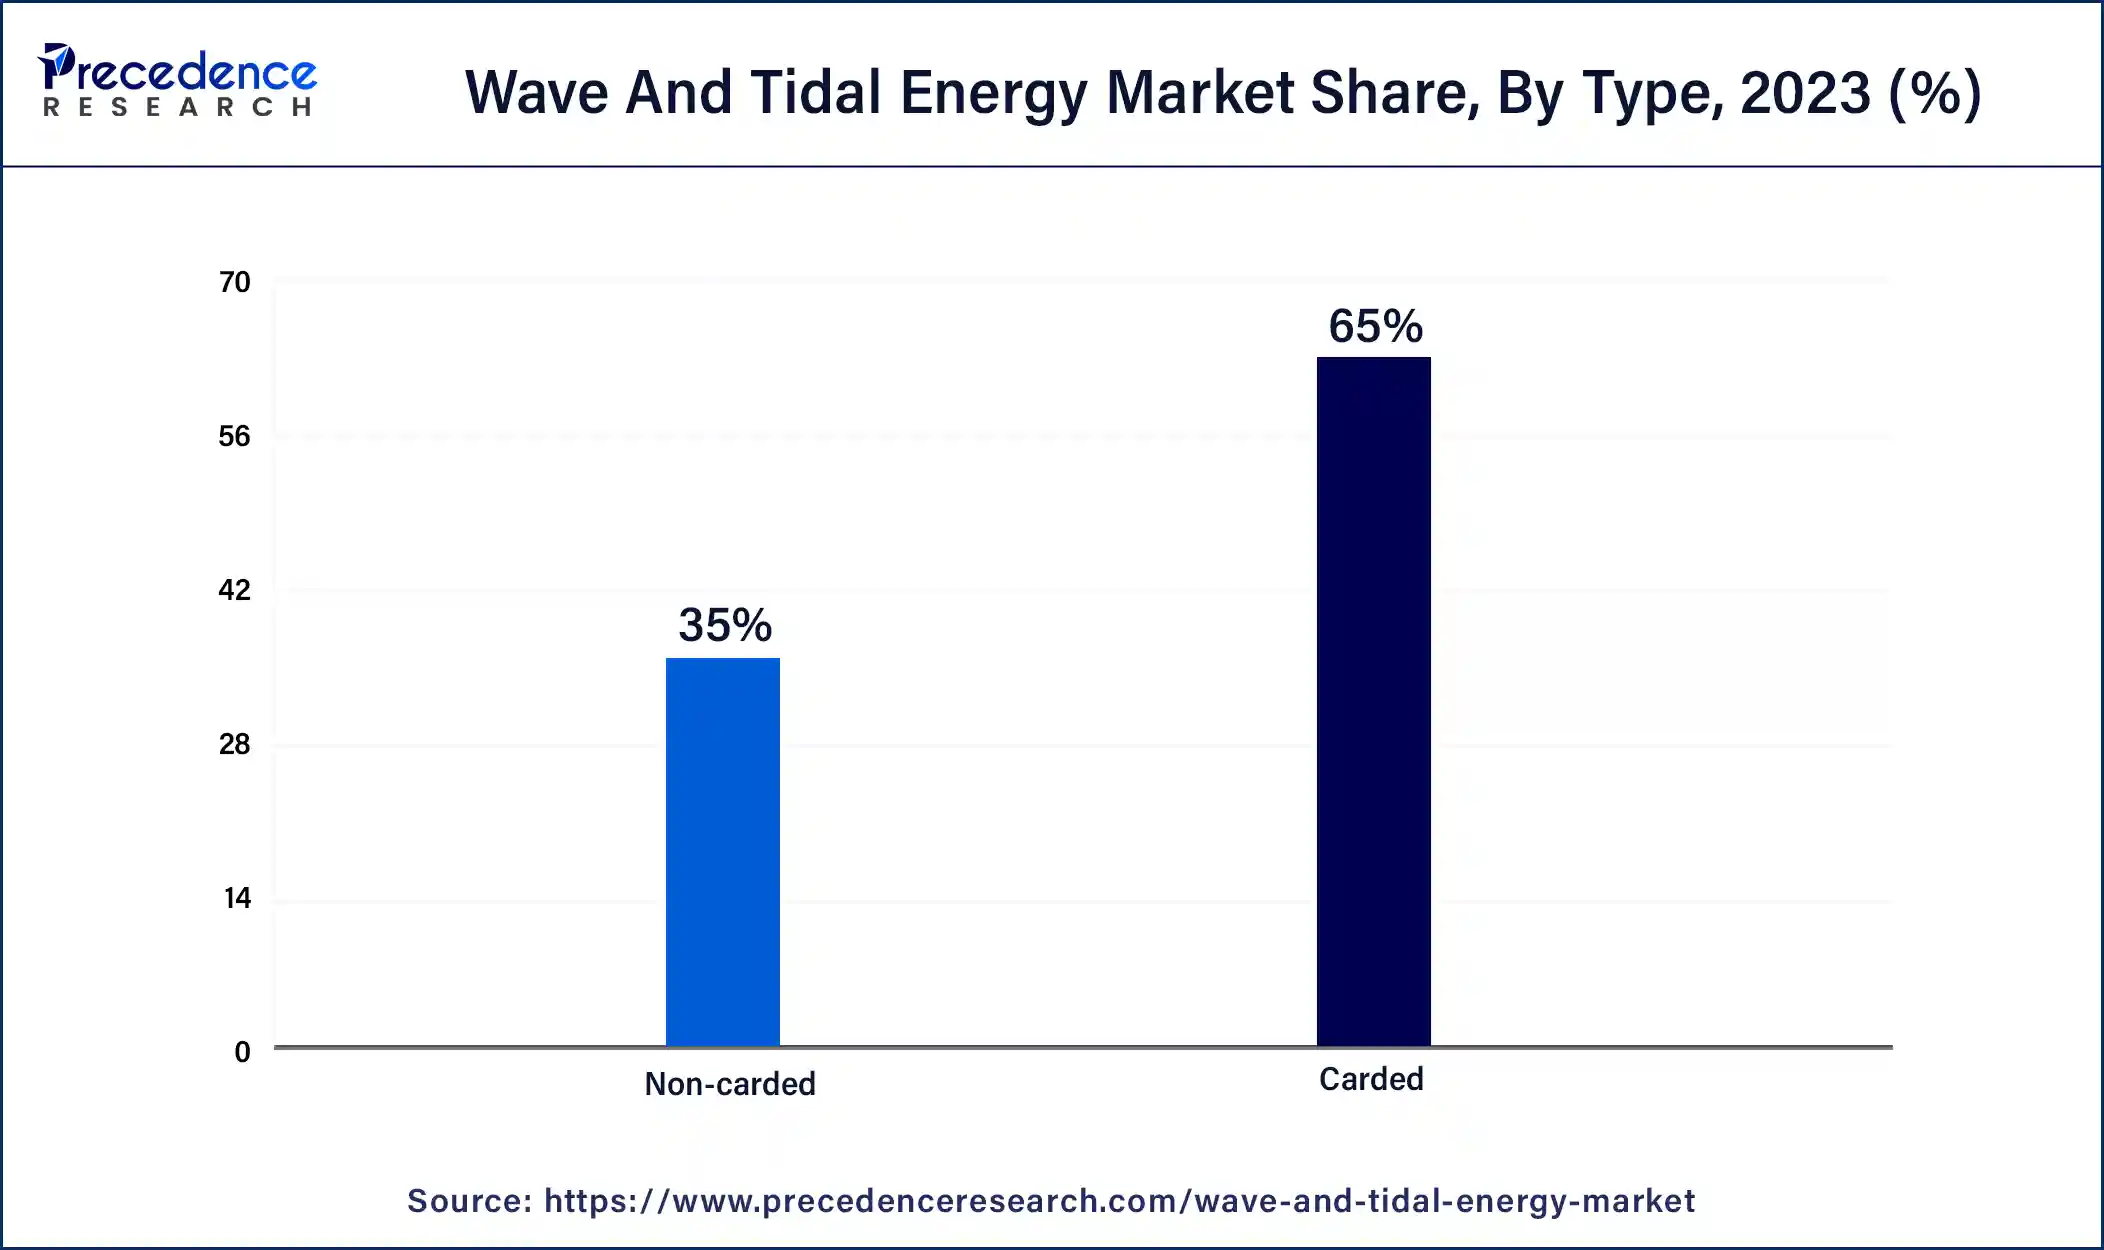 Wave and Tidal Energy Market Share, By Type, 2023 (%)